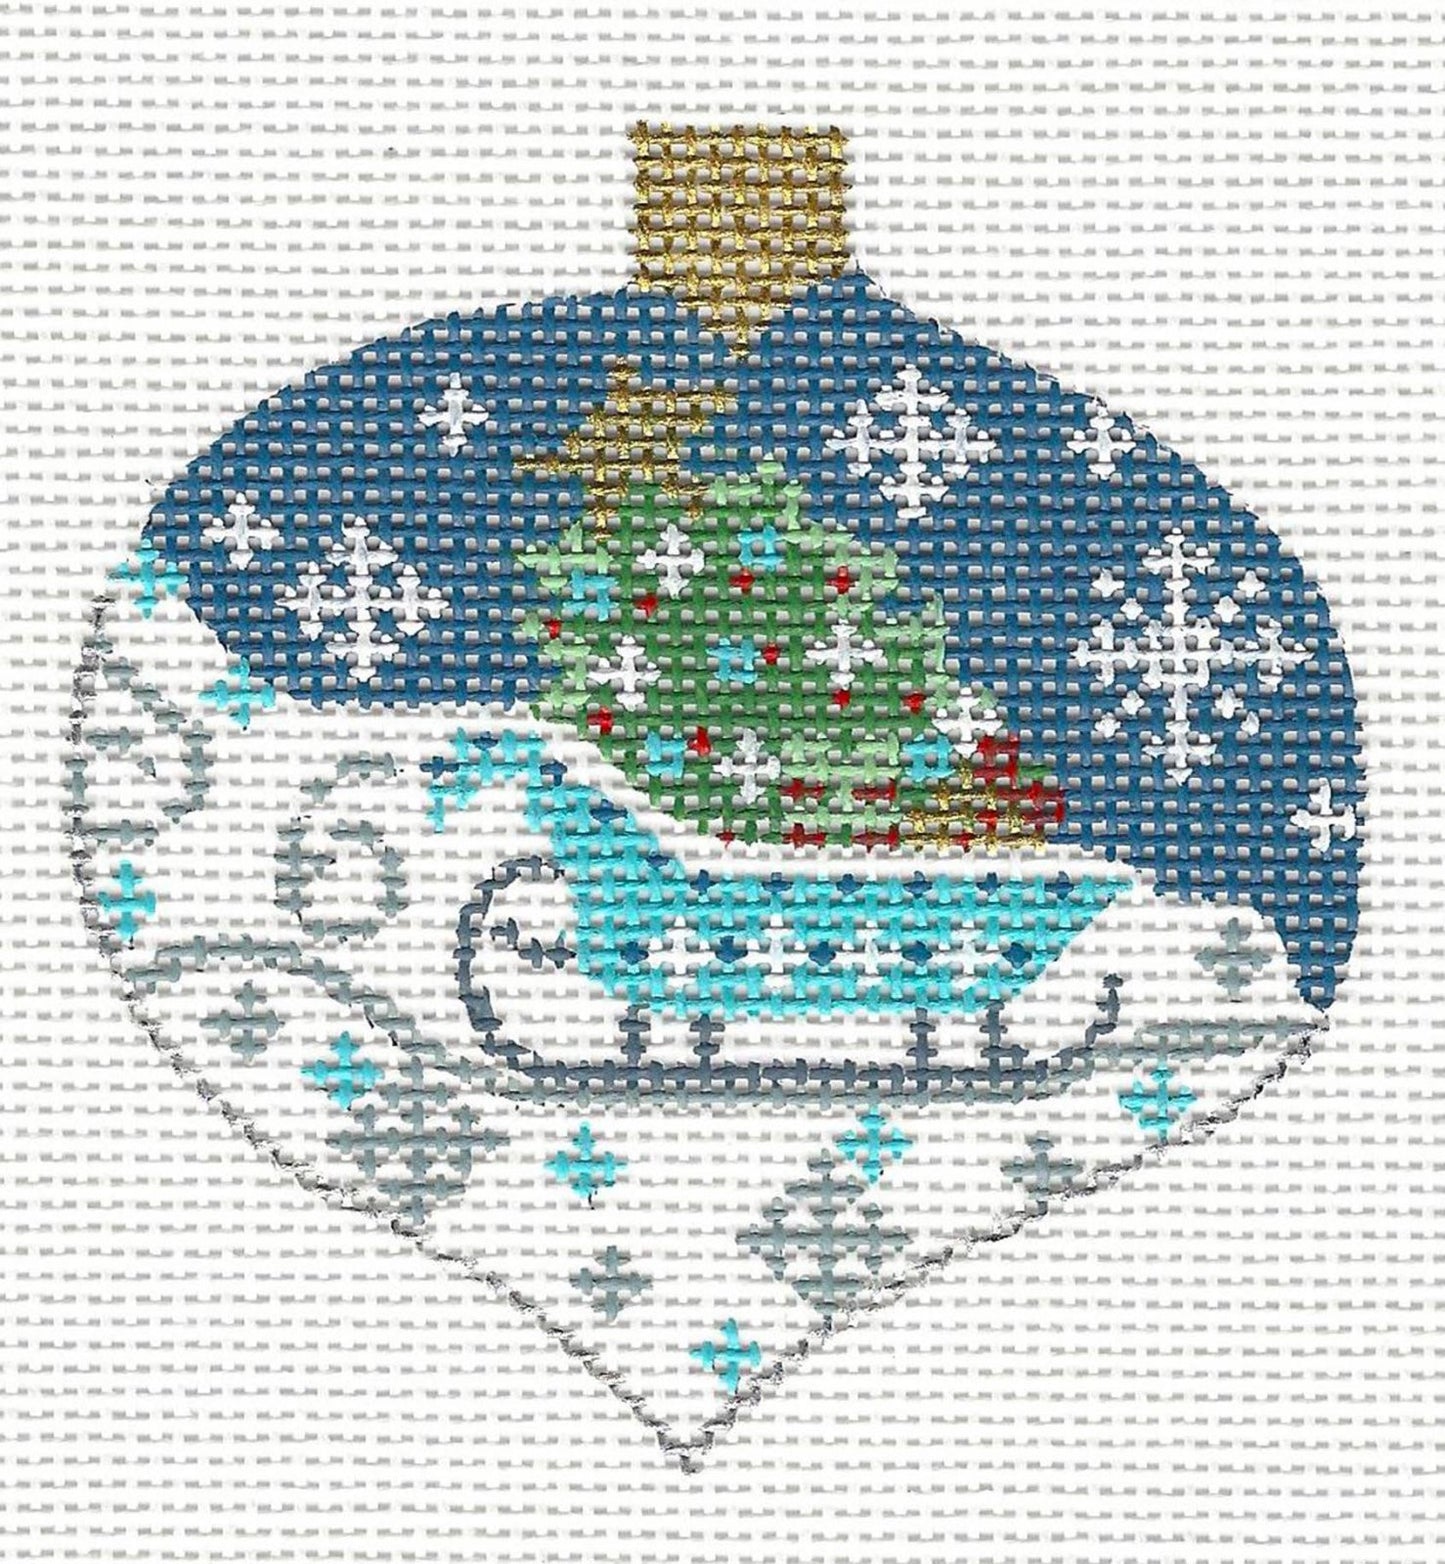 Bauble ~ Blue Sleigh and Tree Ornament on Handpainted Needlepoint Canvas by CH Designs